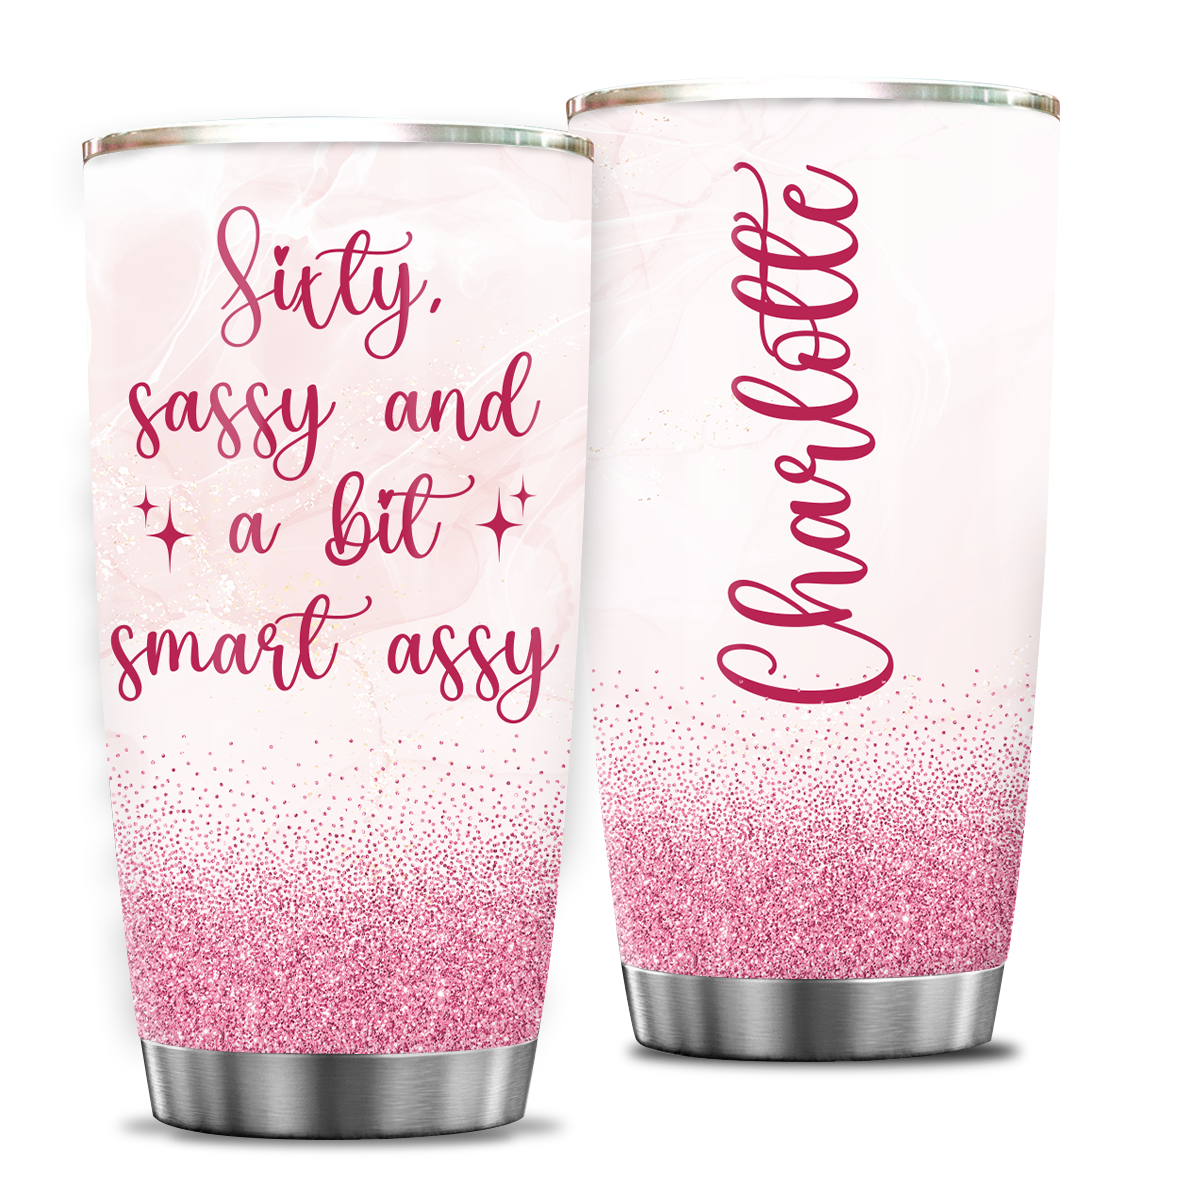 Pink Glitter Sparkle Silver 60th Birthday Sixty Sassy And A Bit Smart Assy Custom Gifts Men Women Stainless Steel Tumbler - Personalized Stainless Steel Tumbler